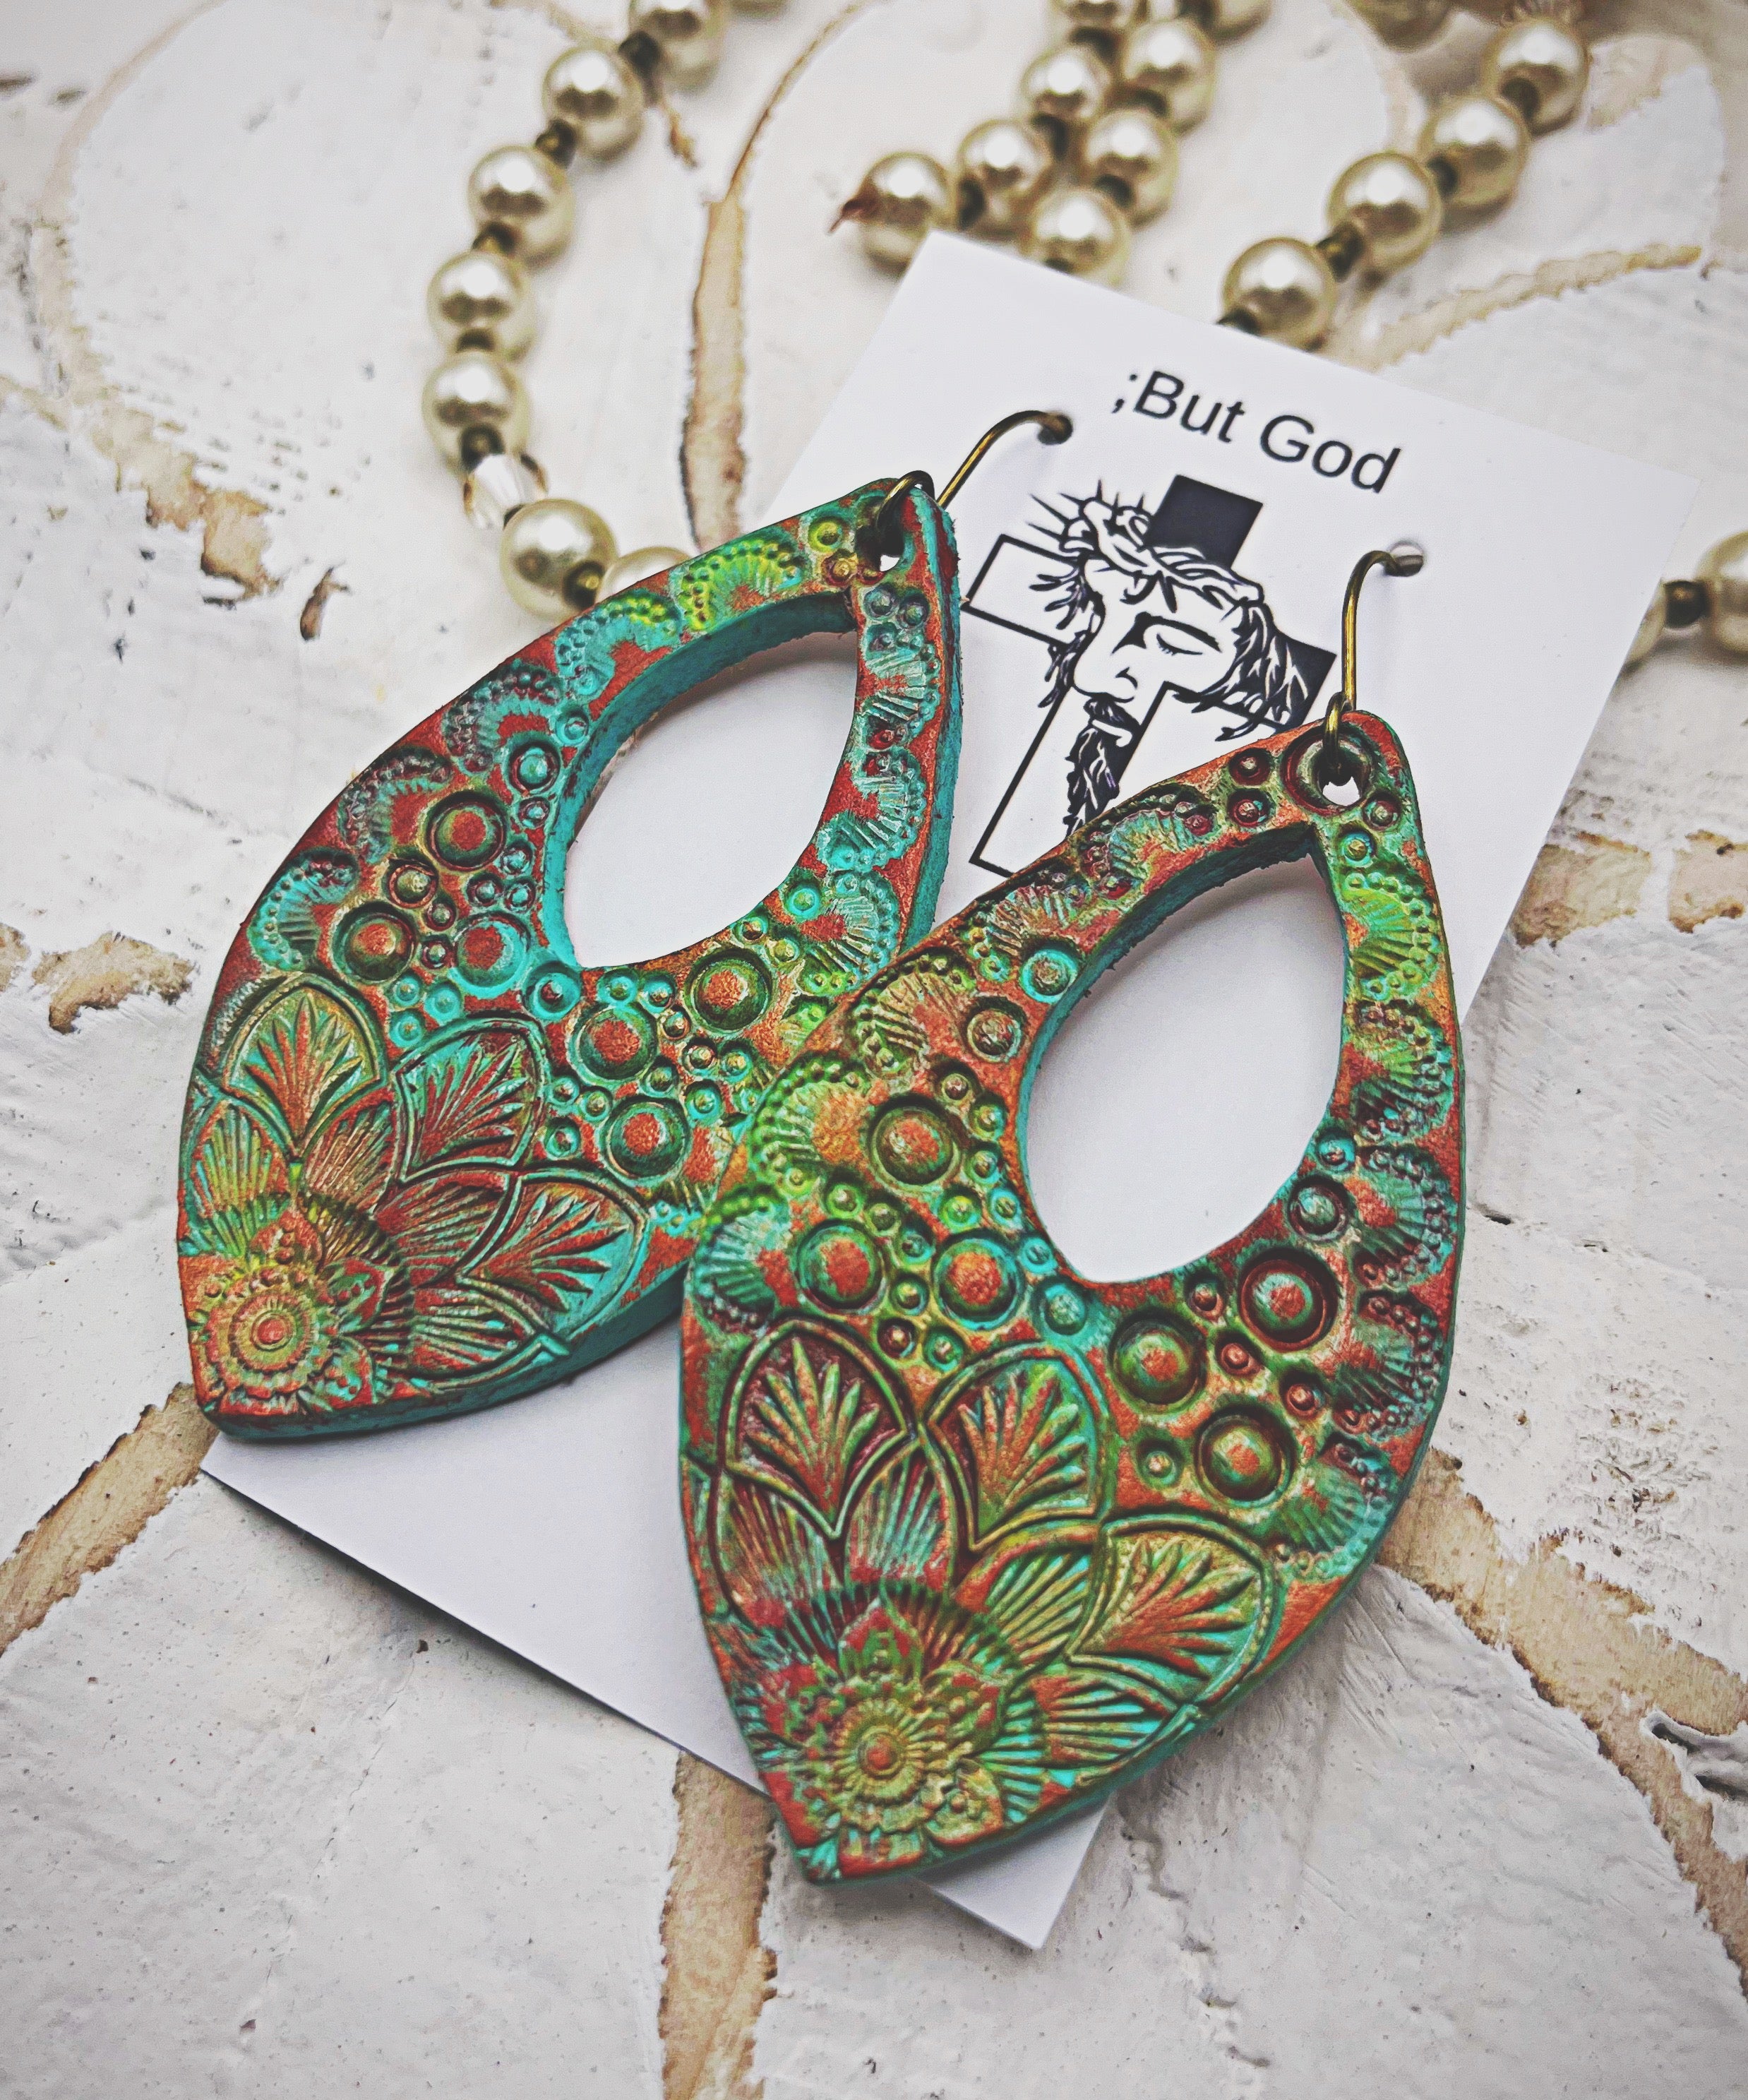 Tooled Leather Earrings- Floral Patina Crystals